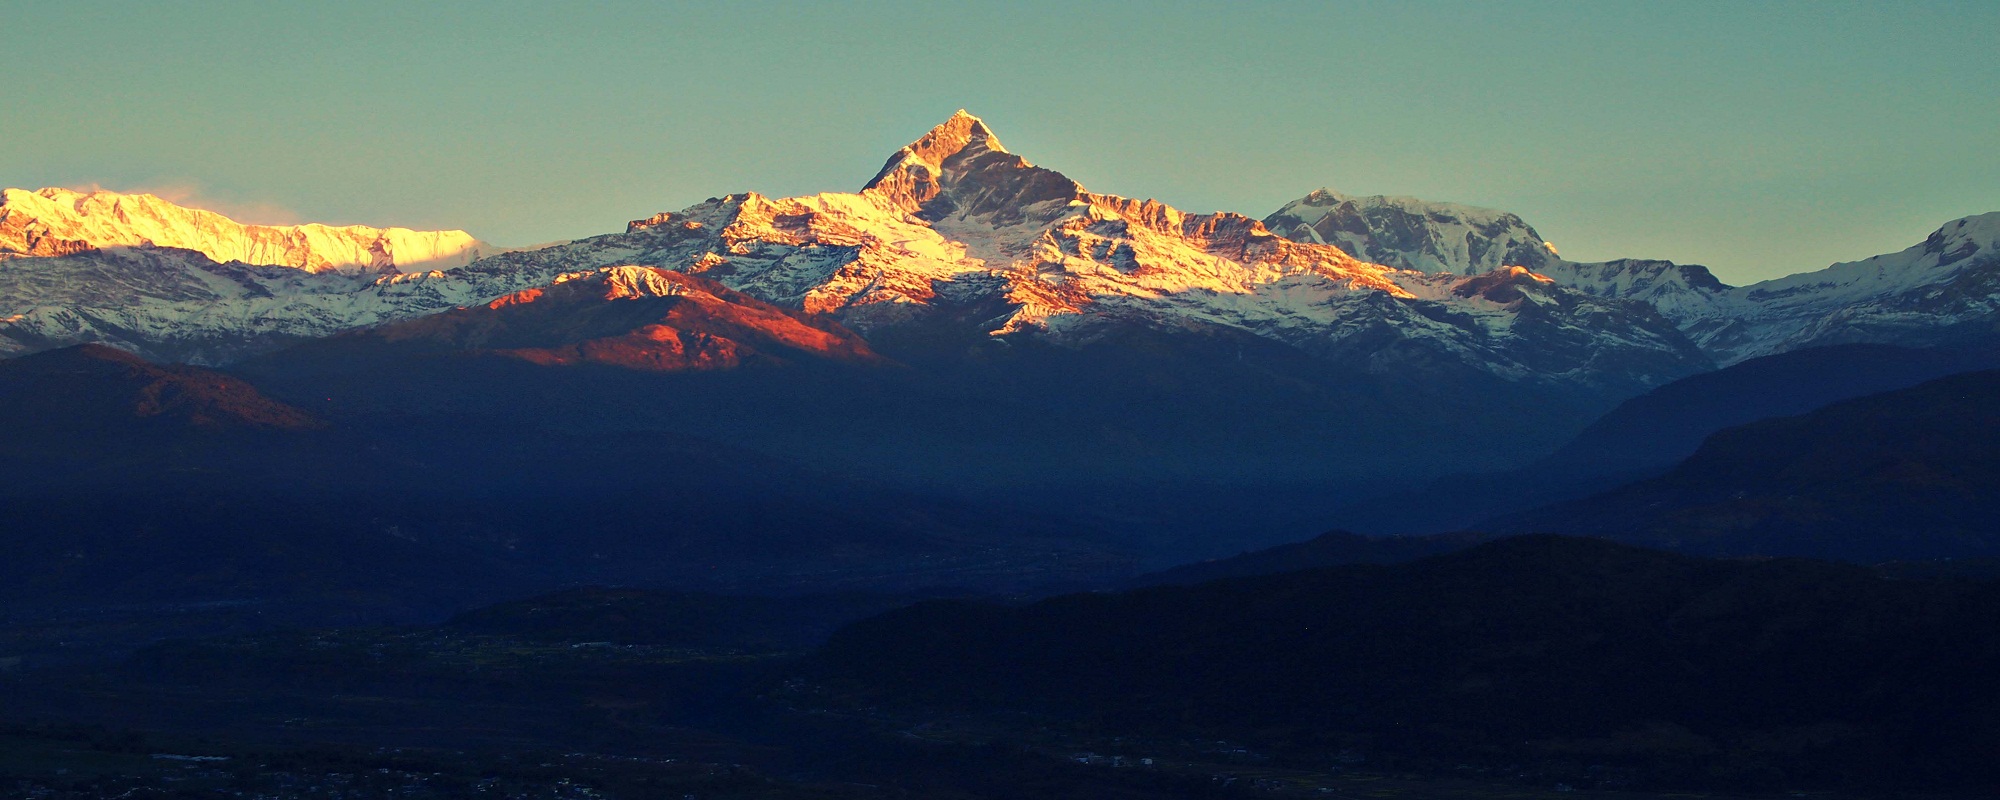 Sunrise and Sunset Tour is one of the most popular Nepal tour packages